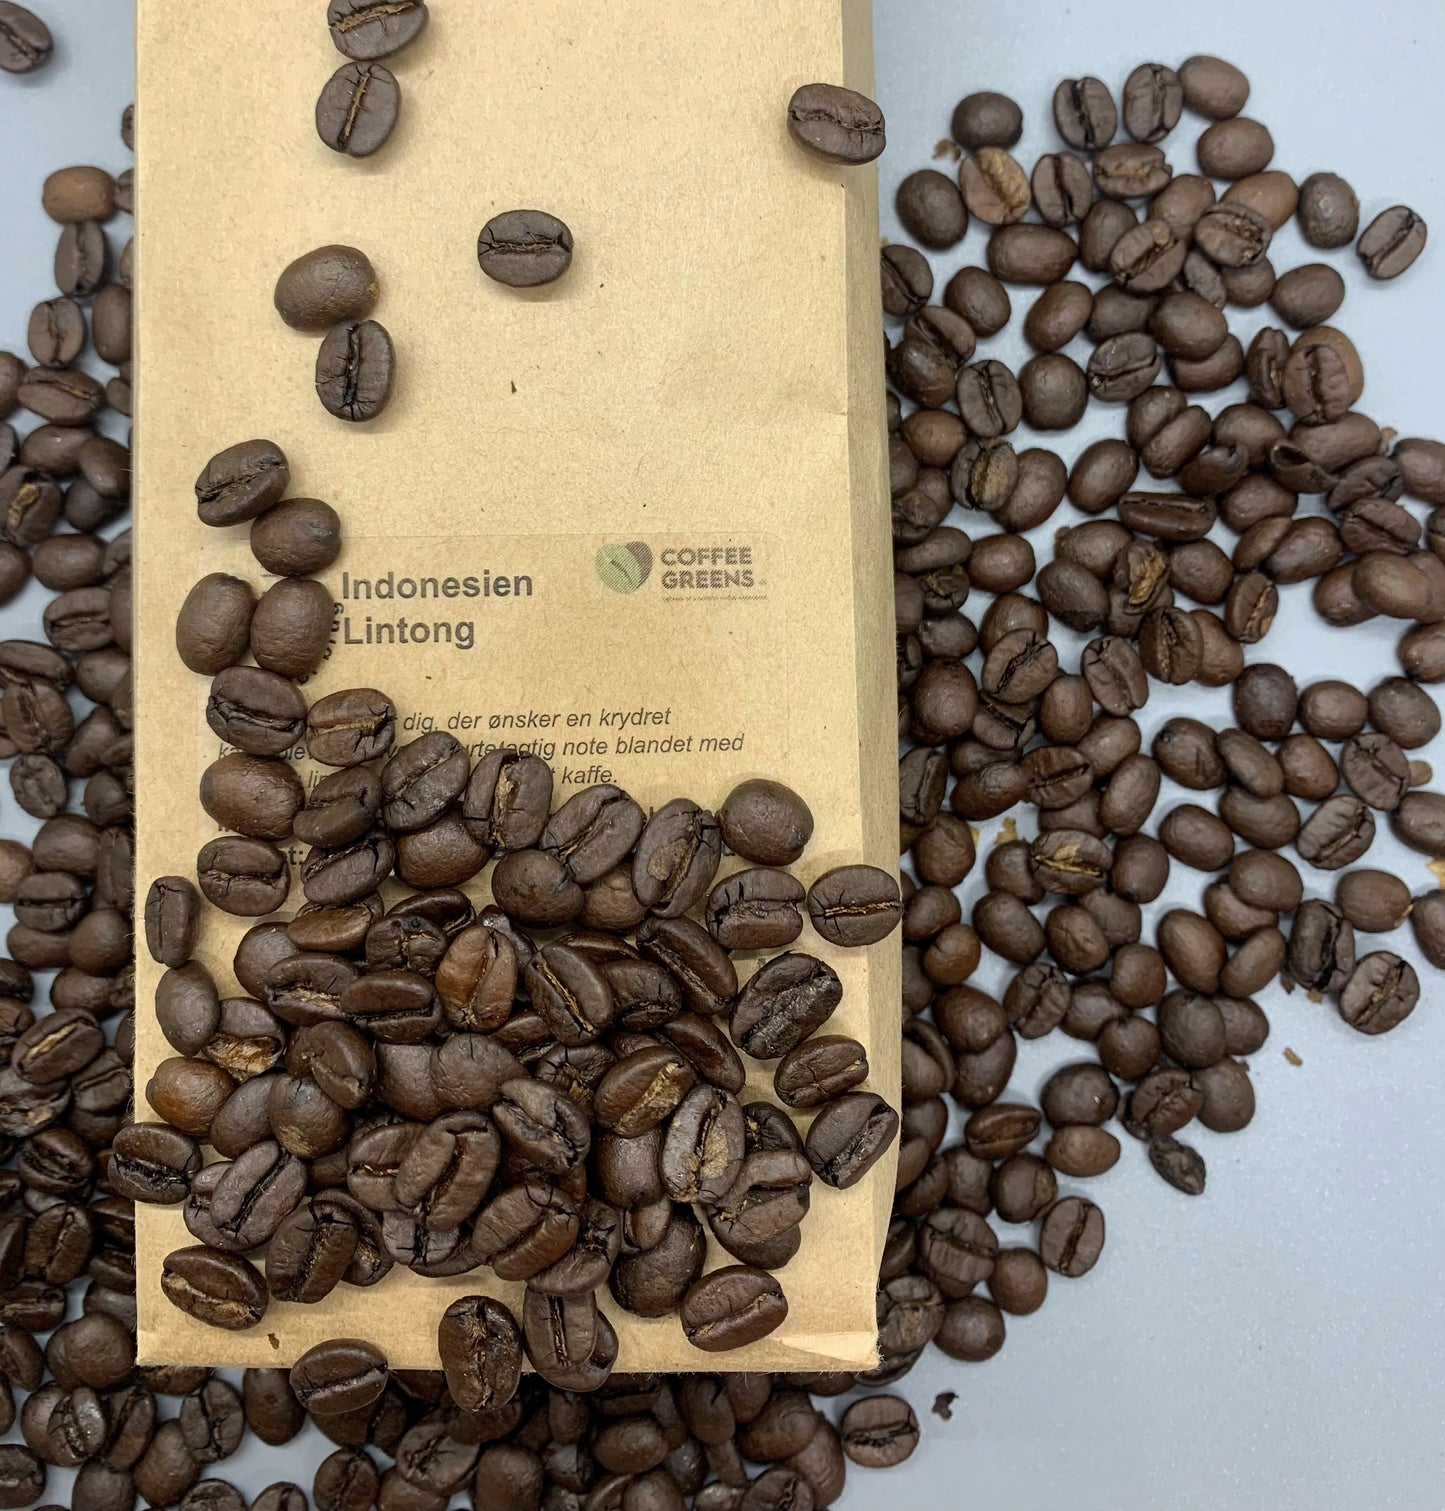 Indonesia Lintong - Roasted coffee beans